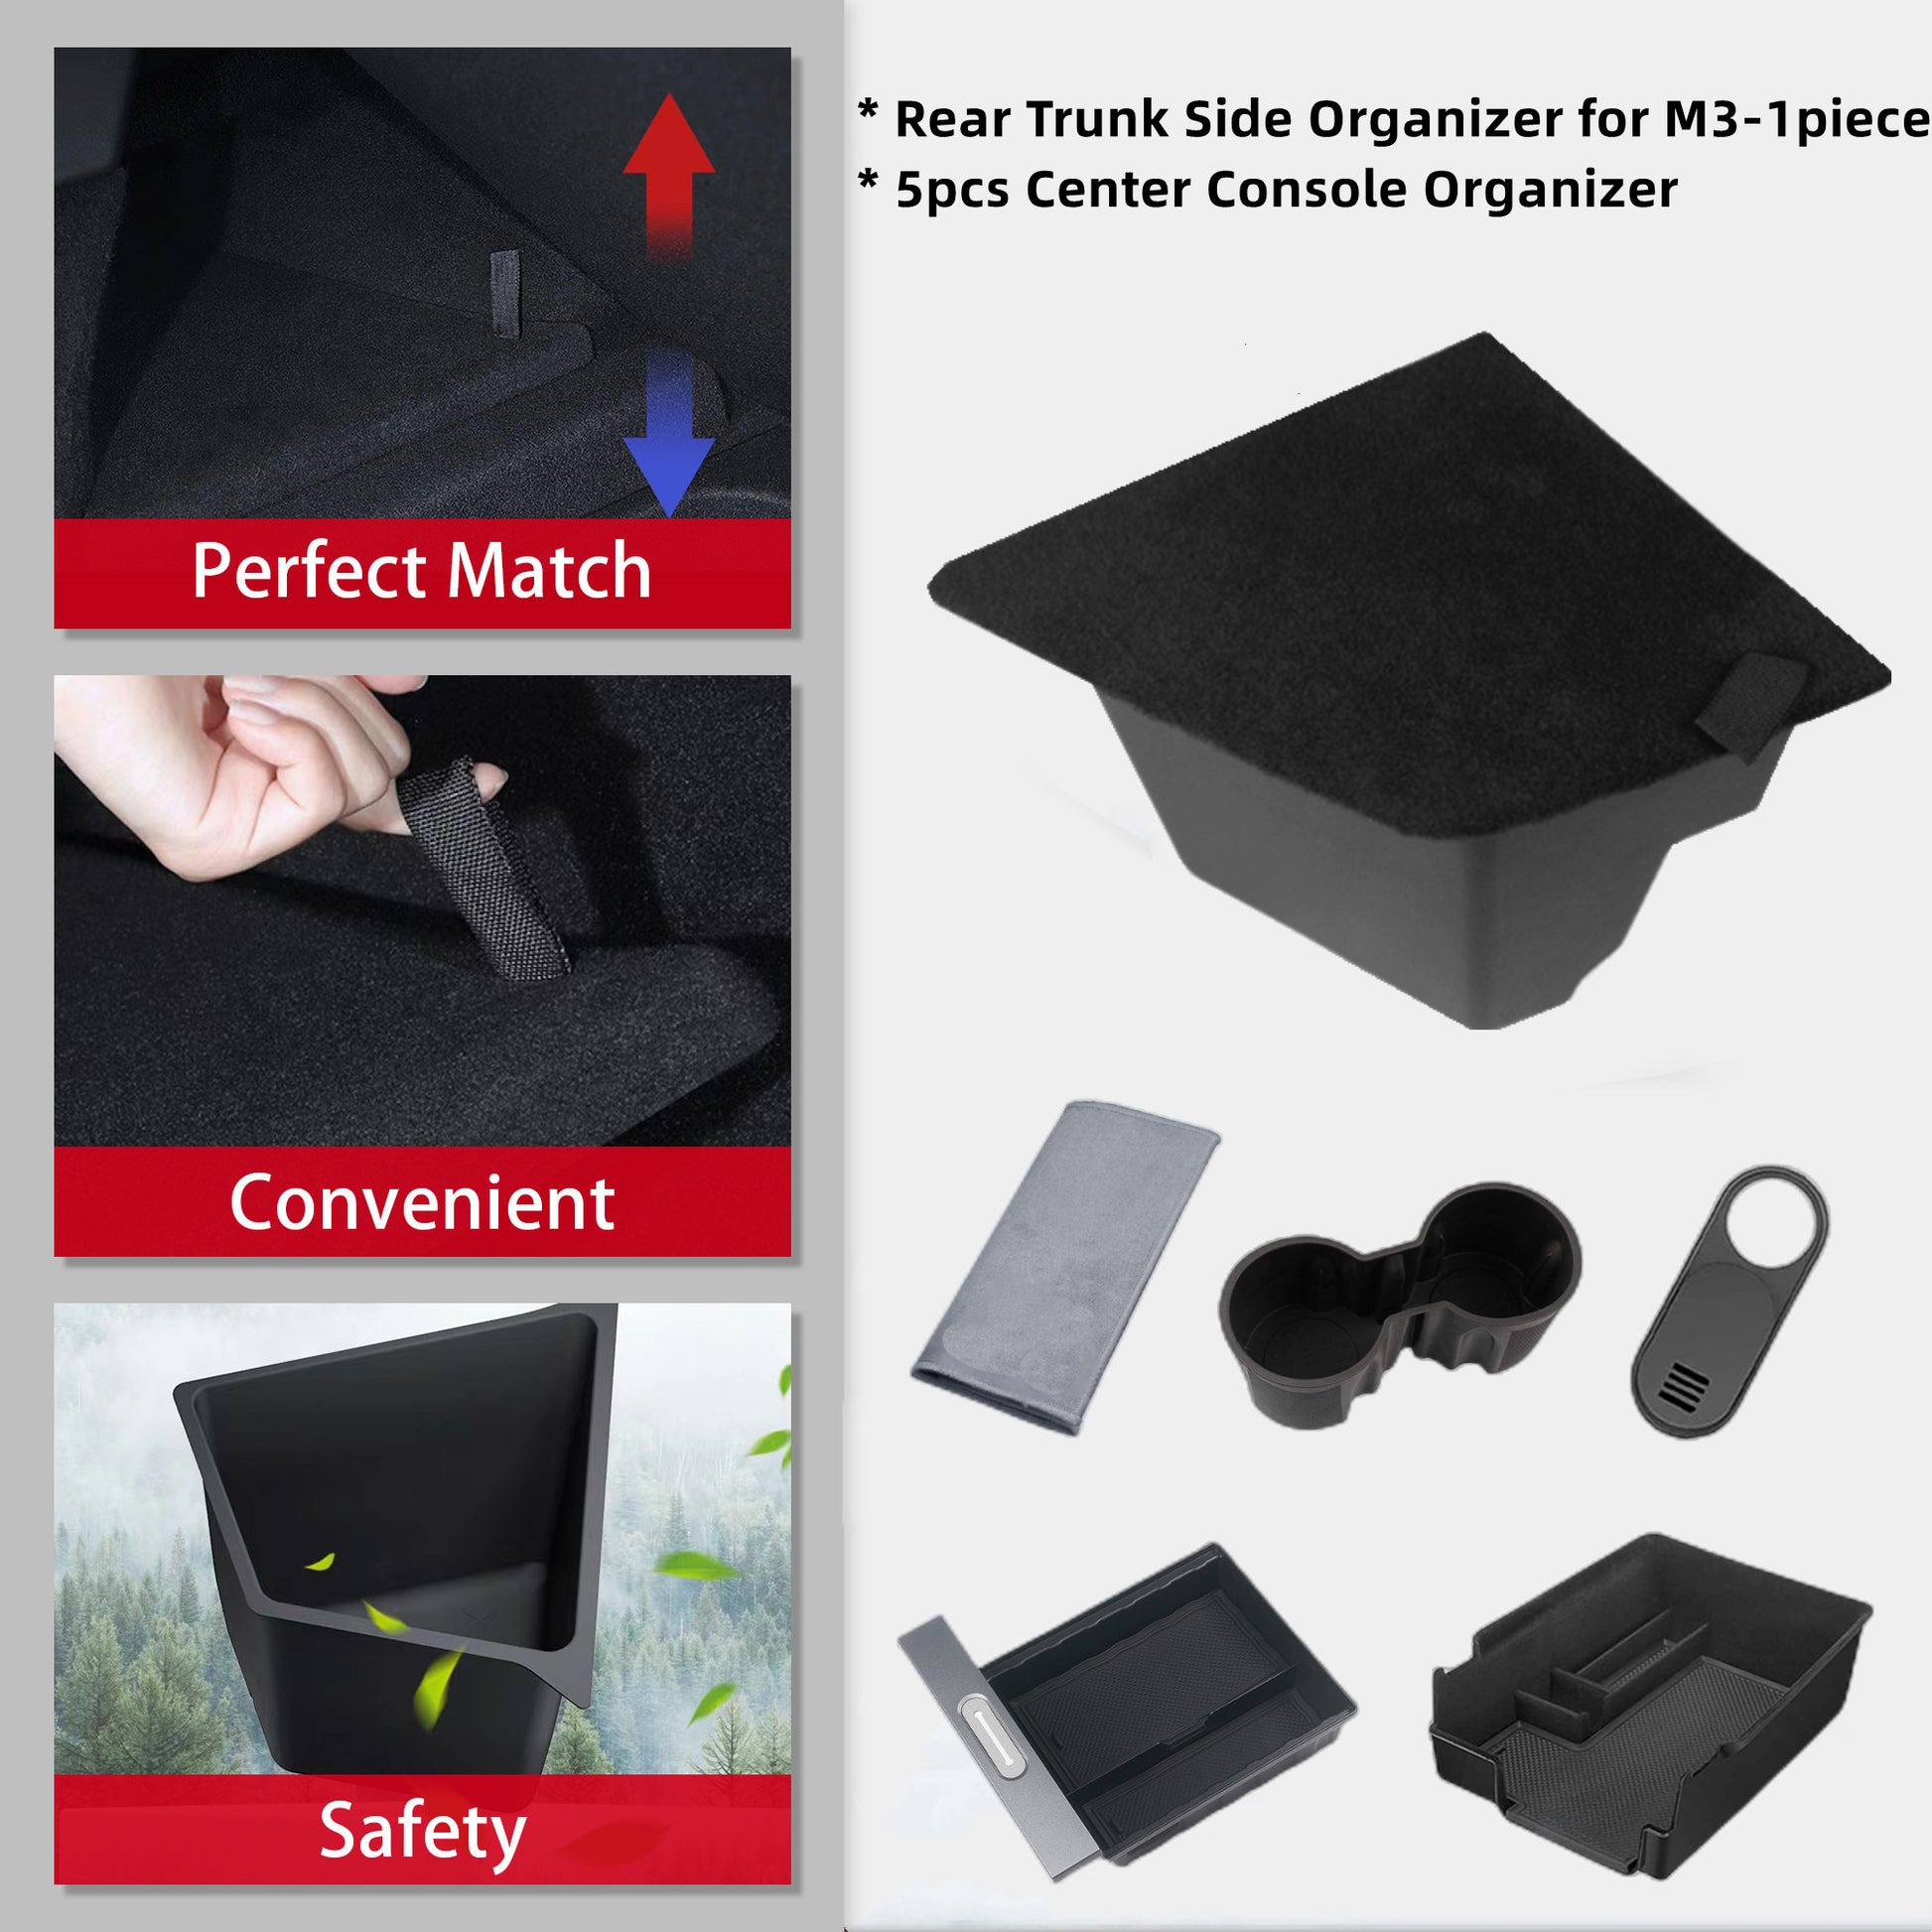 Tesla Model Y Rear Trunk Side Organizer Sorting Bins and Central Control Storage Box 5-Piece Set can be inserted directly into the groove without tools. They can also be easily removed for cleaning or accessOriginal car standard diy design.